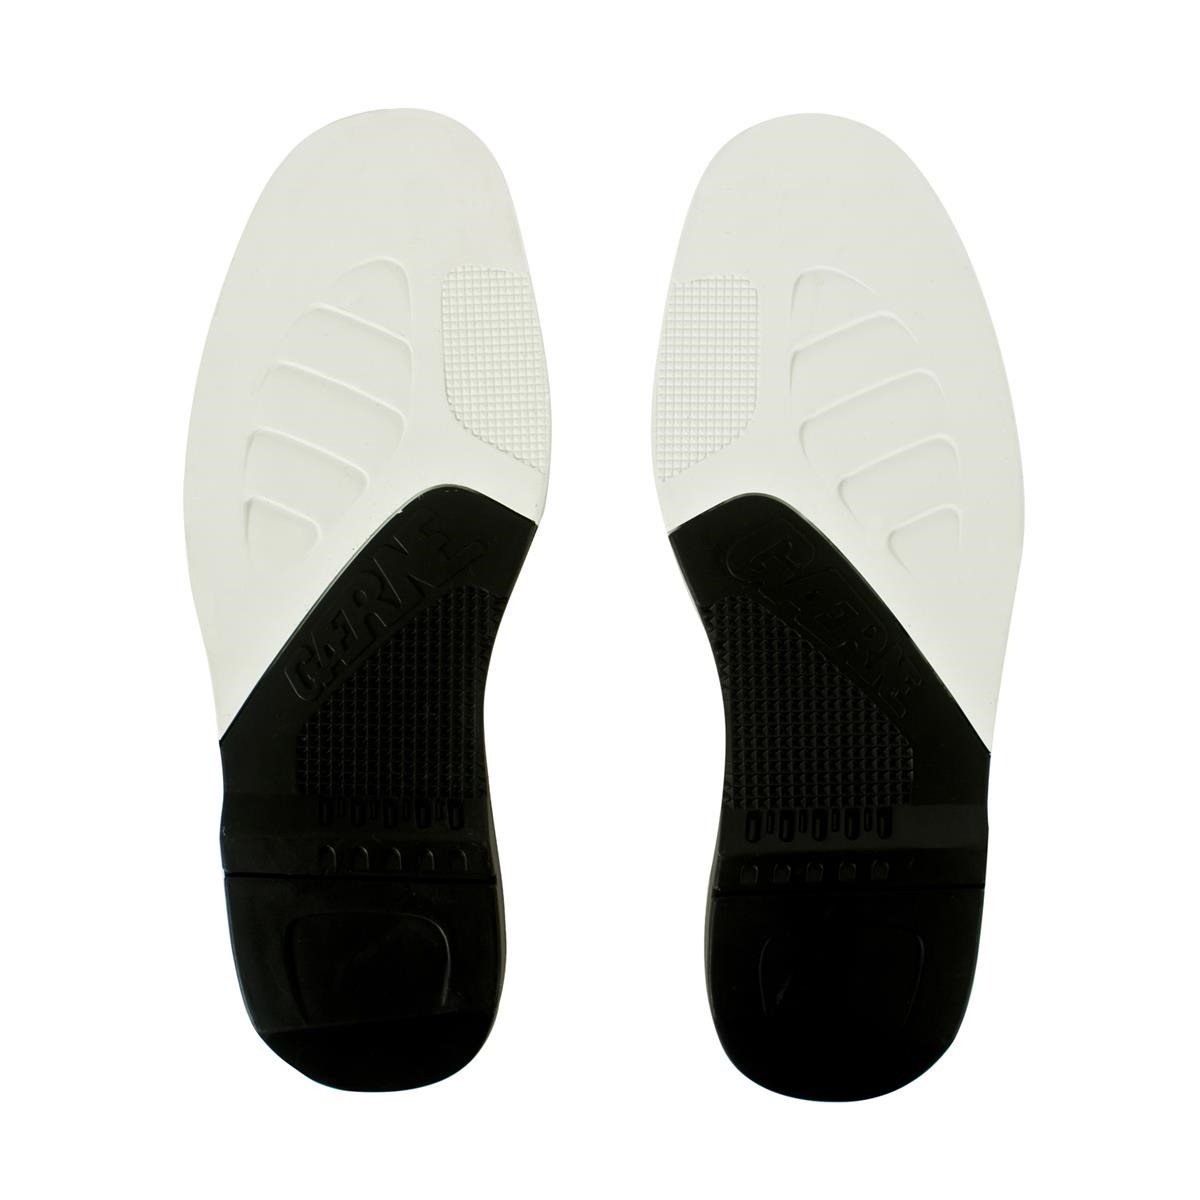 Gaerne Replacement Sole SG10 Black/White